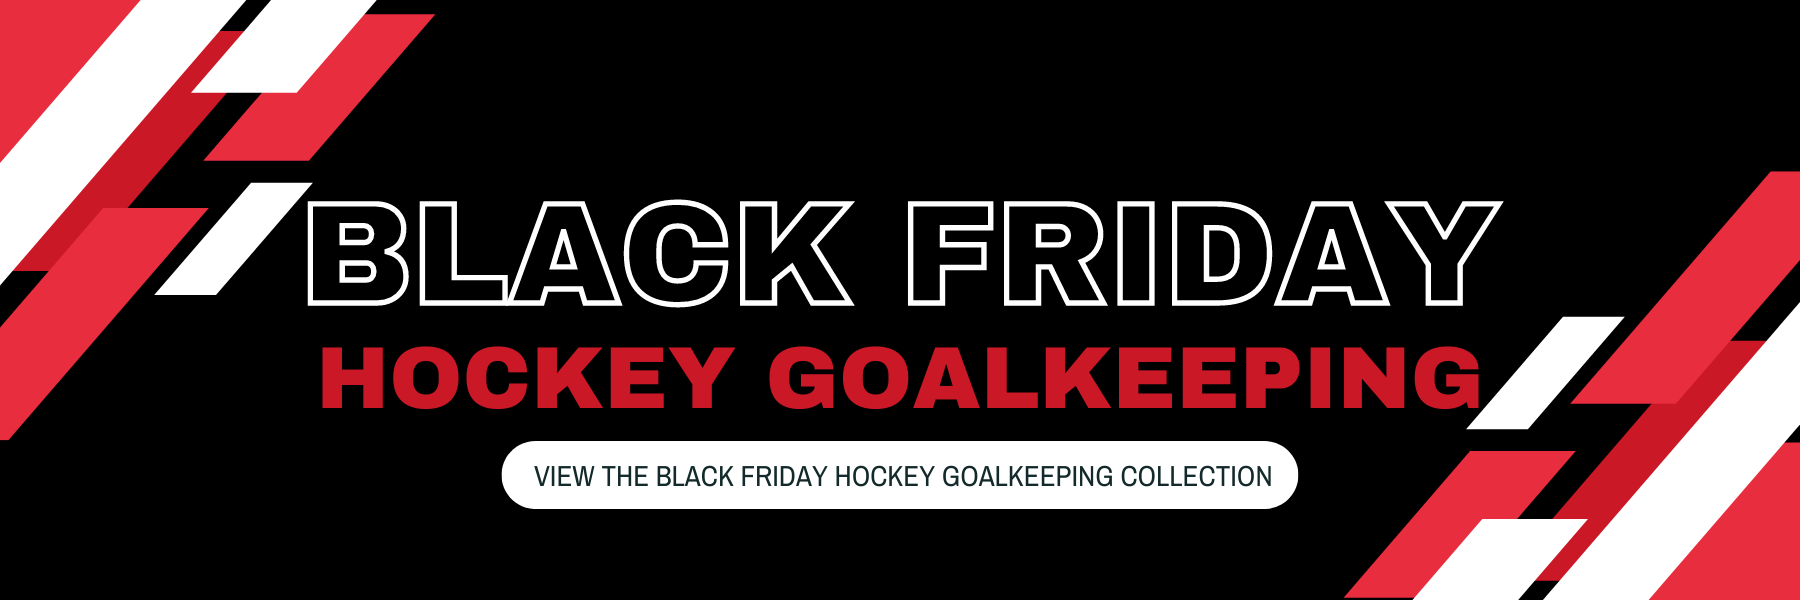 Black Friday Goalkeeping Collection